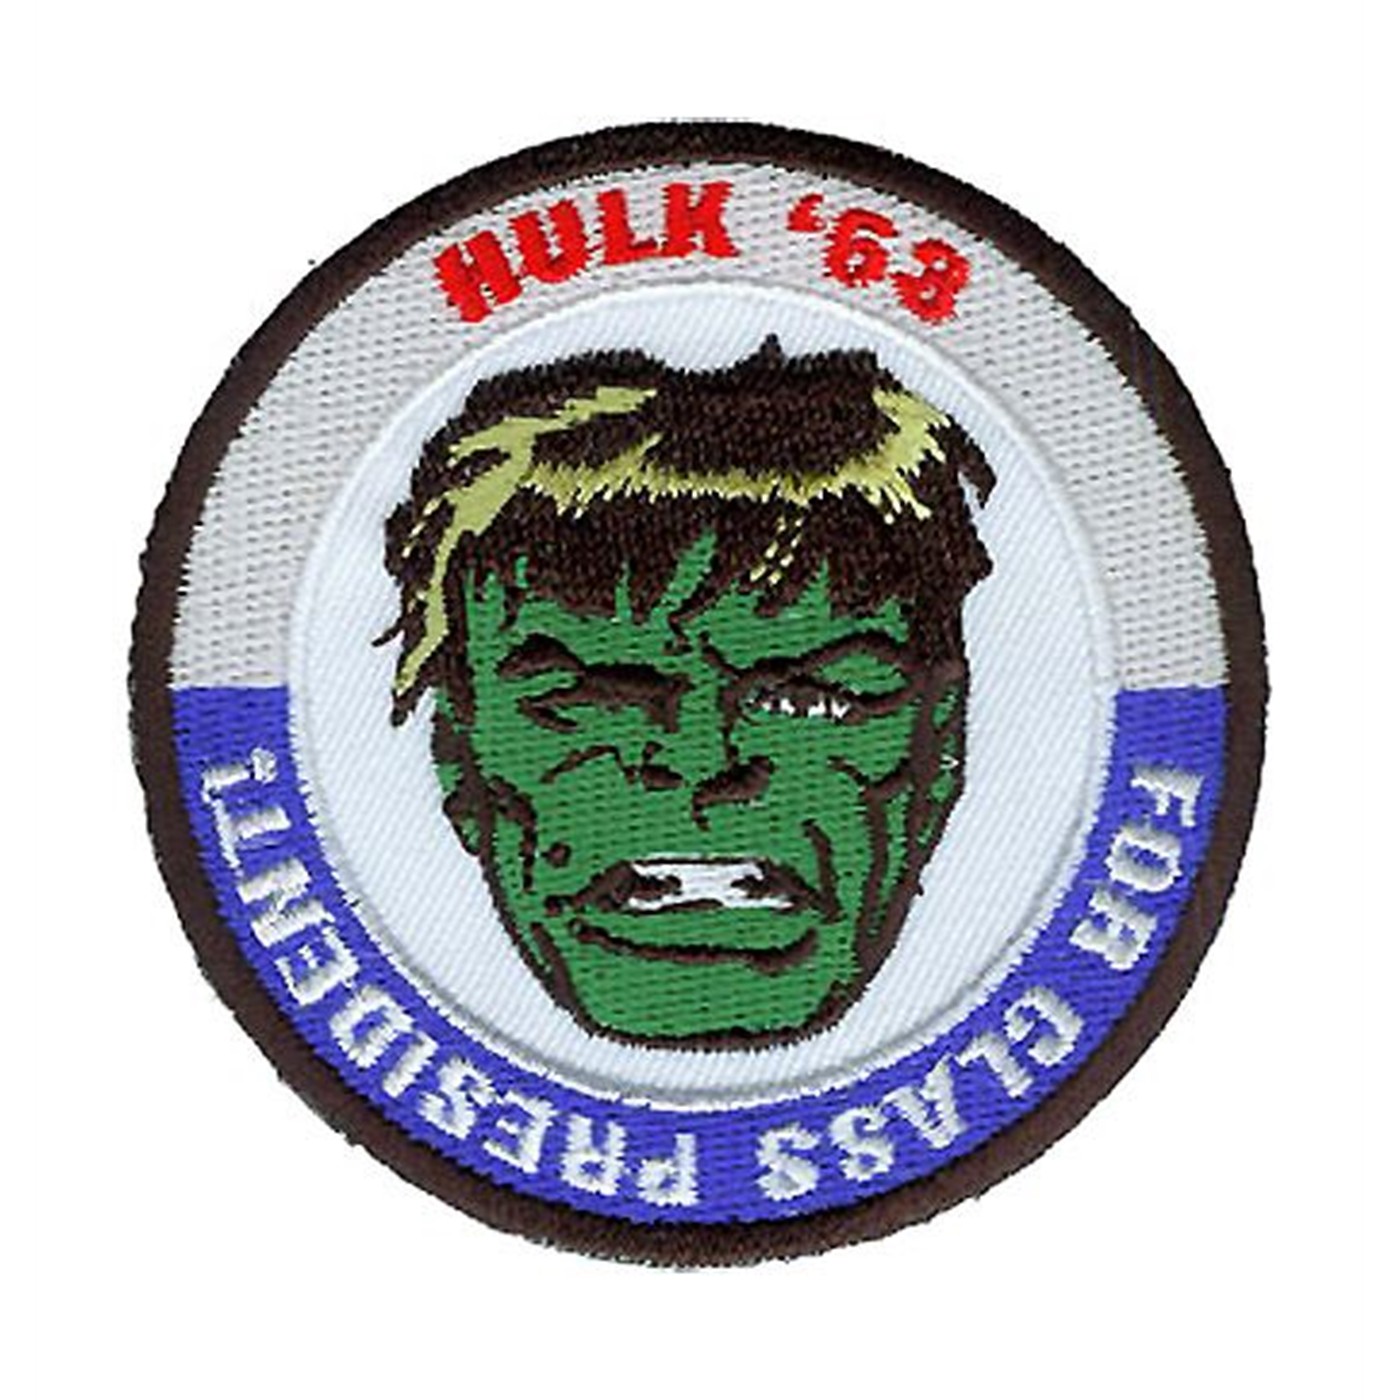 Hulk For Class President Patch